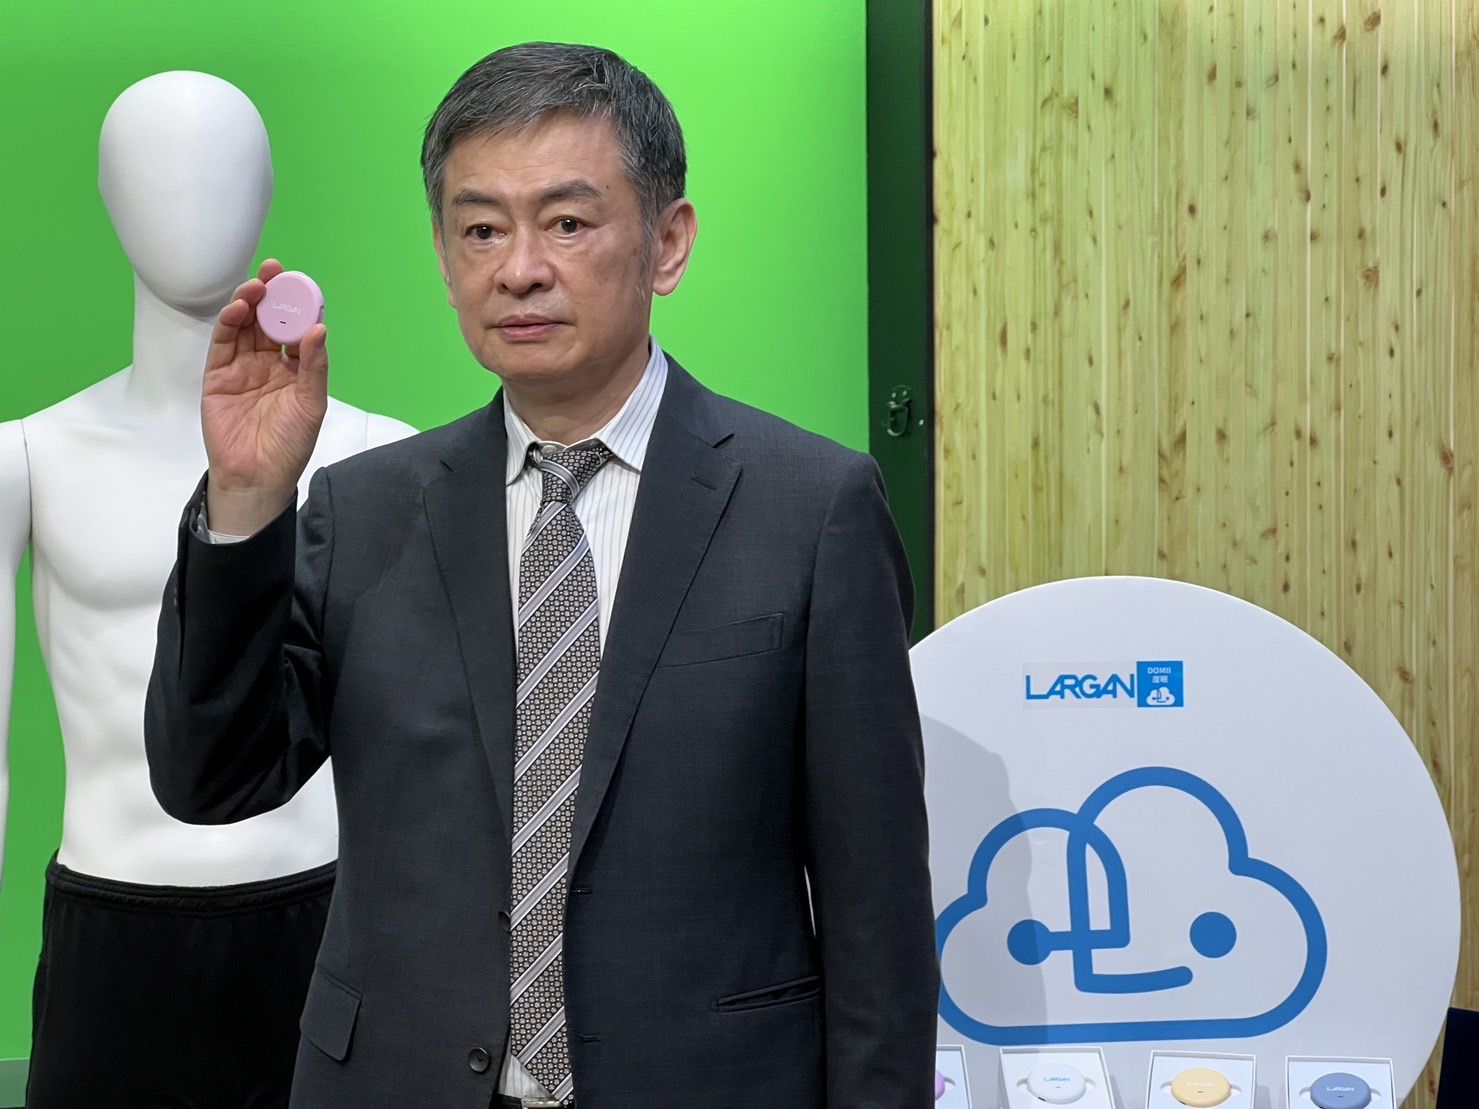 Largan Precision diversifies into healthcare! Subsidiary Largan Health AI-TECH launches New Sleep Monitoring Product – Lin En-ping: "Slept well" after trying It for one night